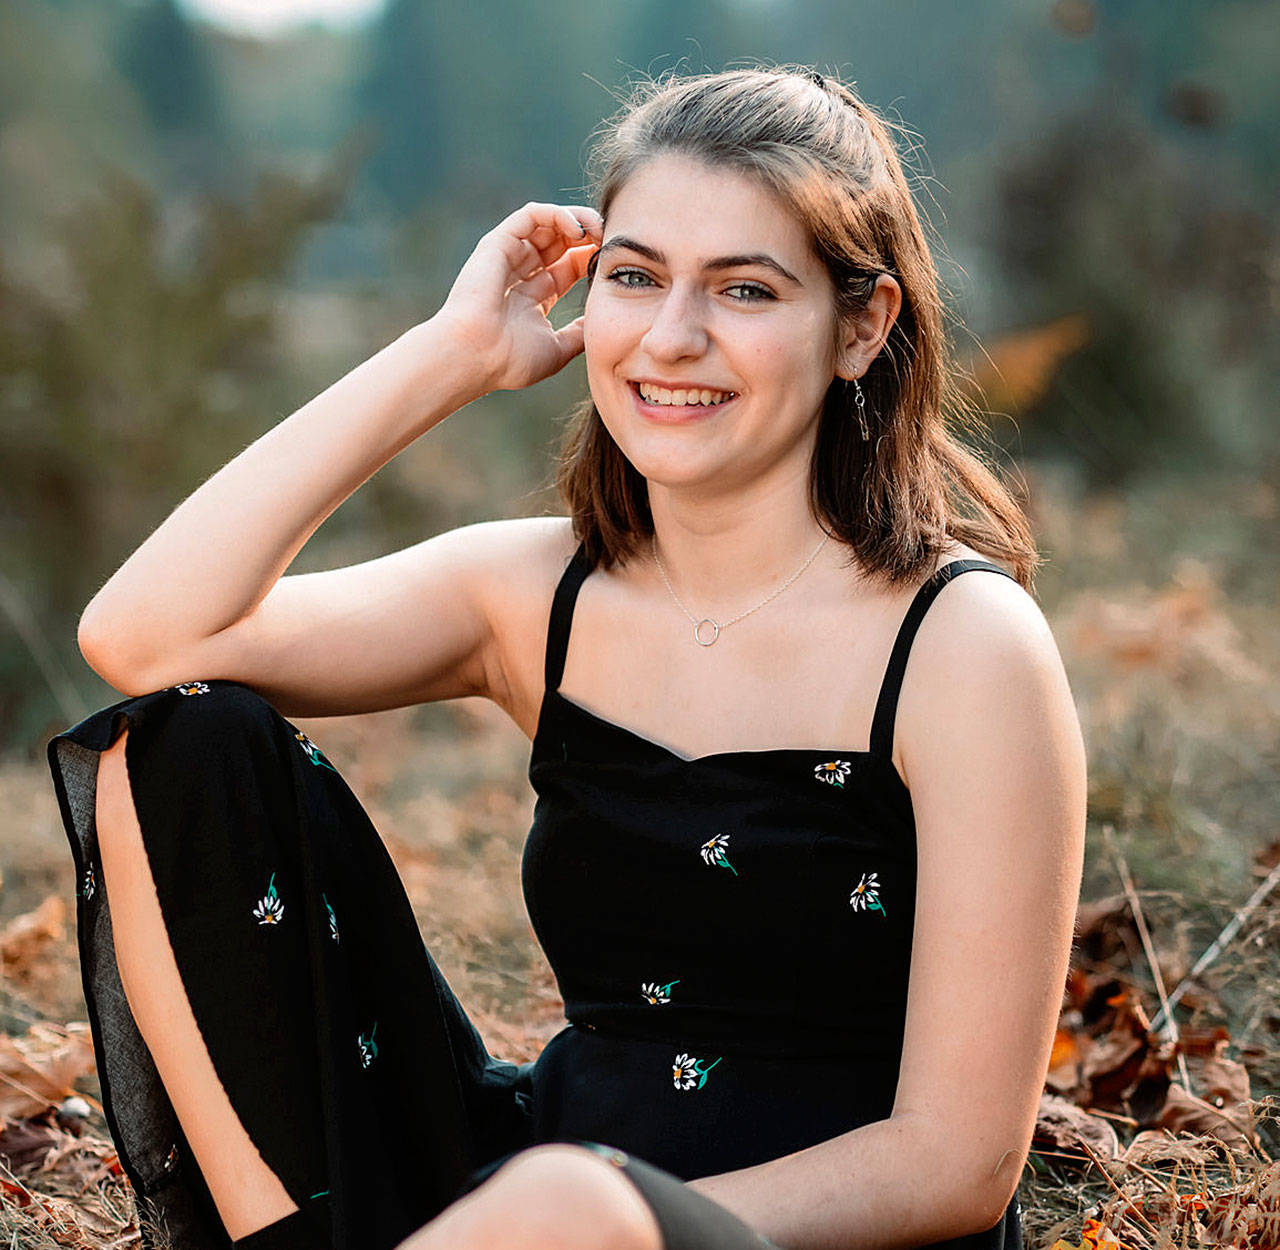 Sequim's Madeline Dietzman took top honors in the Monday Musicale scholarship competition, earning a $2,500 as she looks to pursue her studies this fall at Western Washington University. Submitted photo